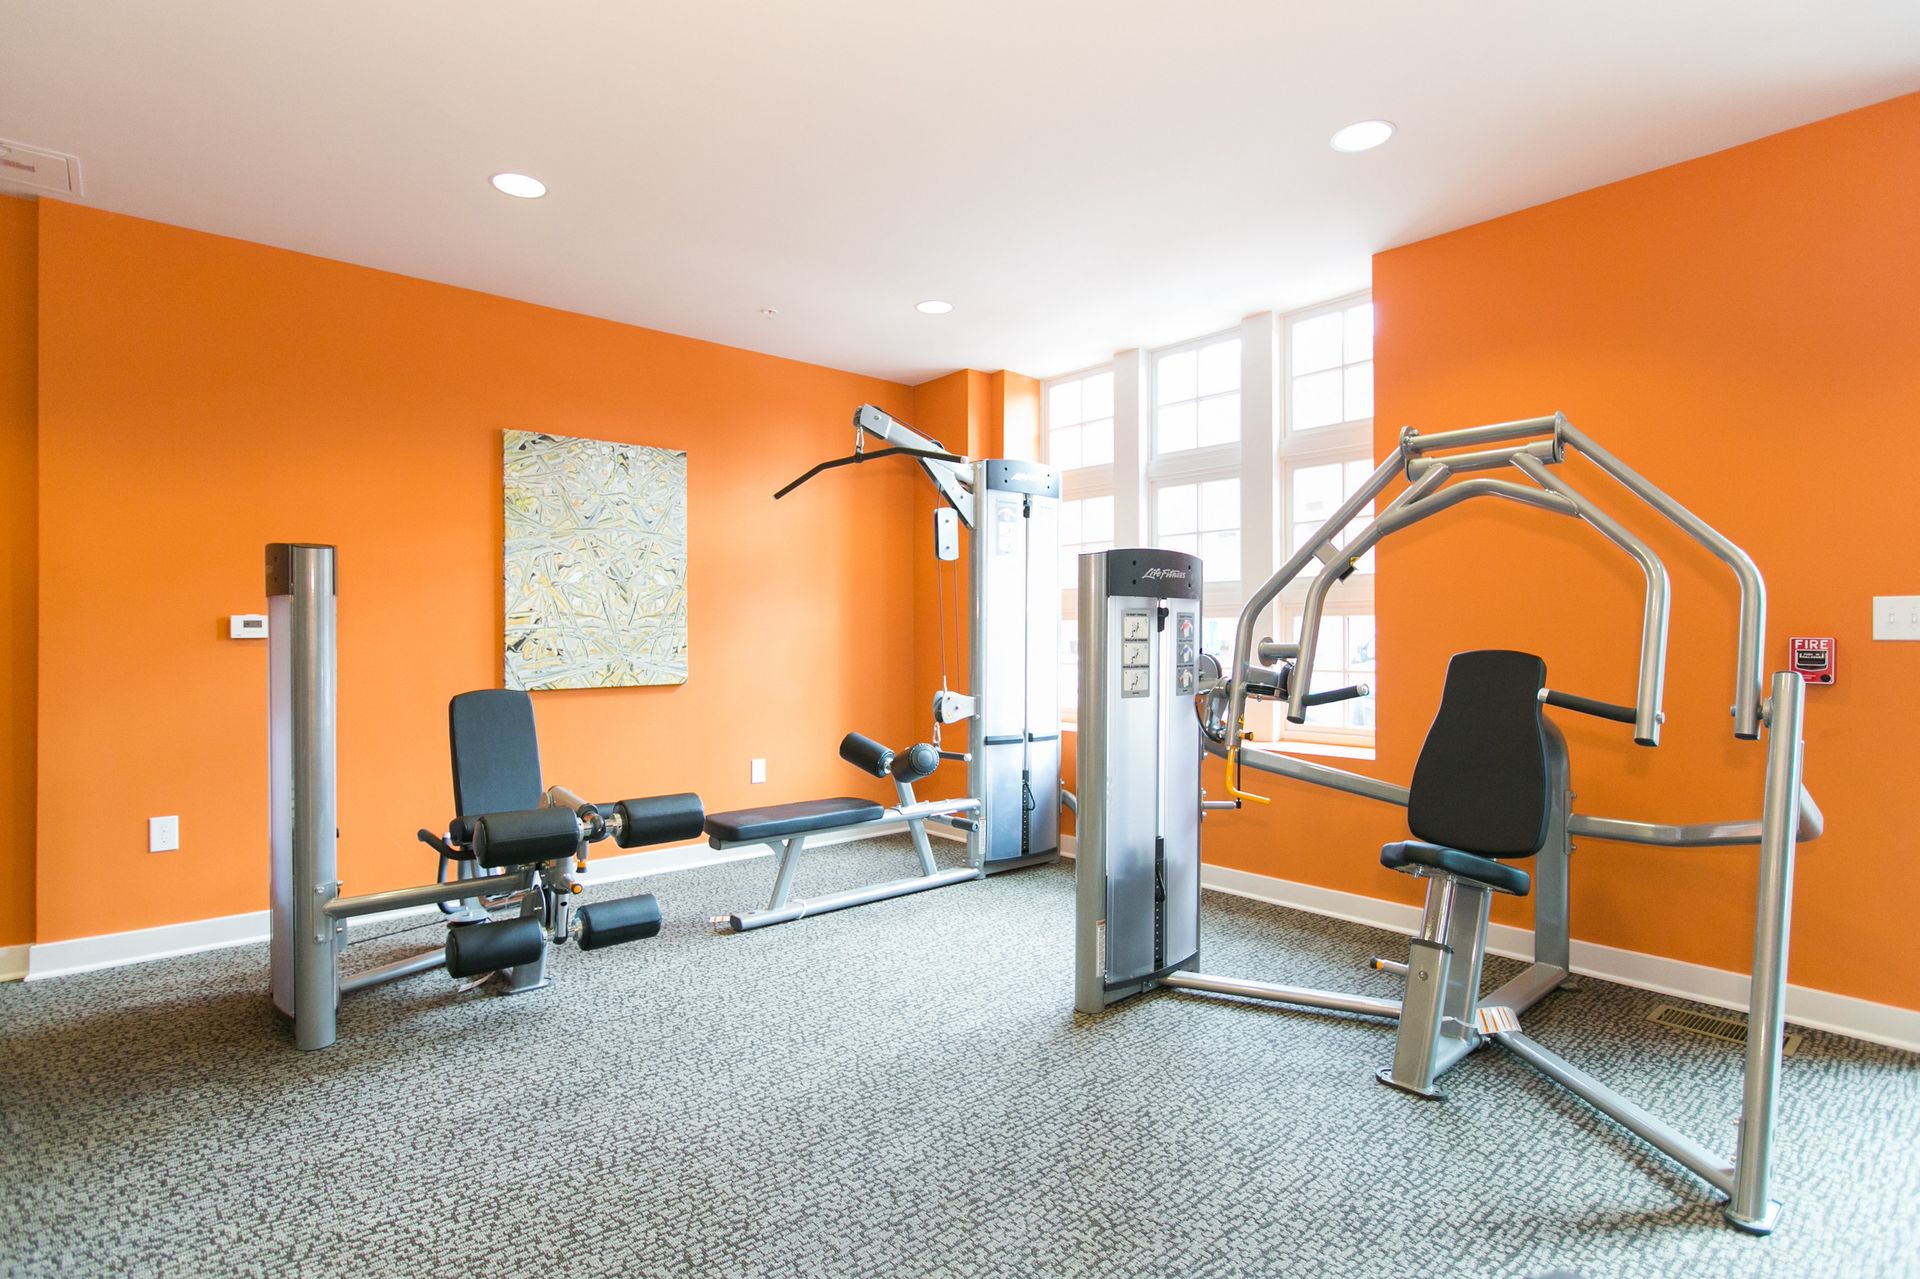 Fitness Center at Marketplace at Fells Point.